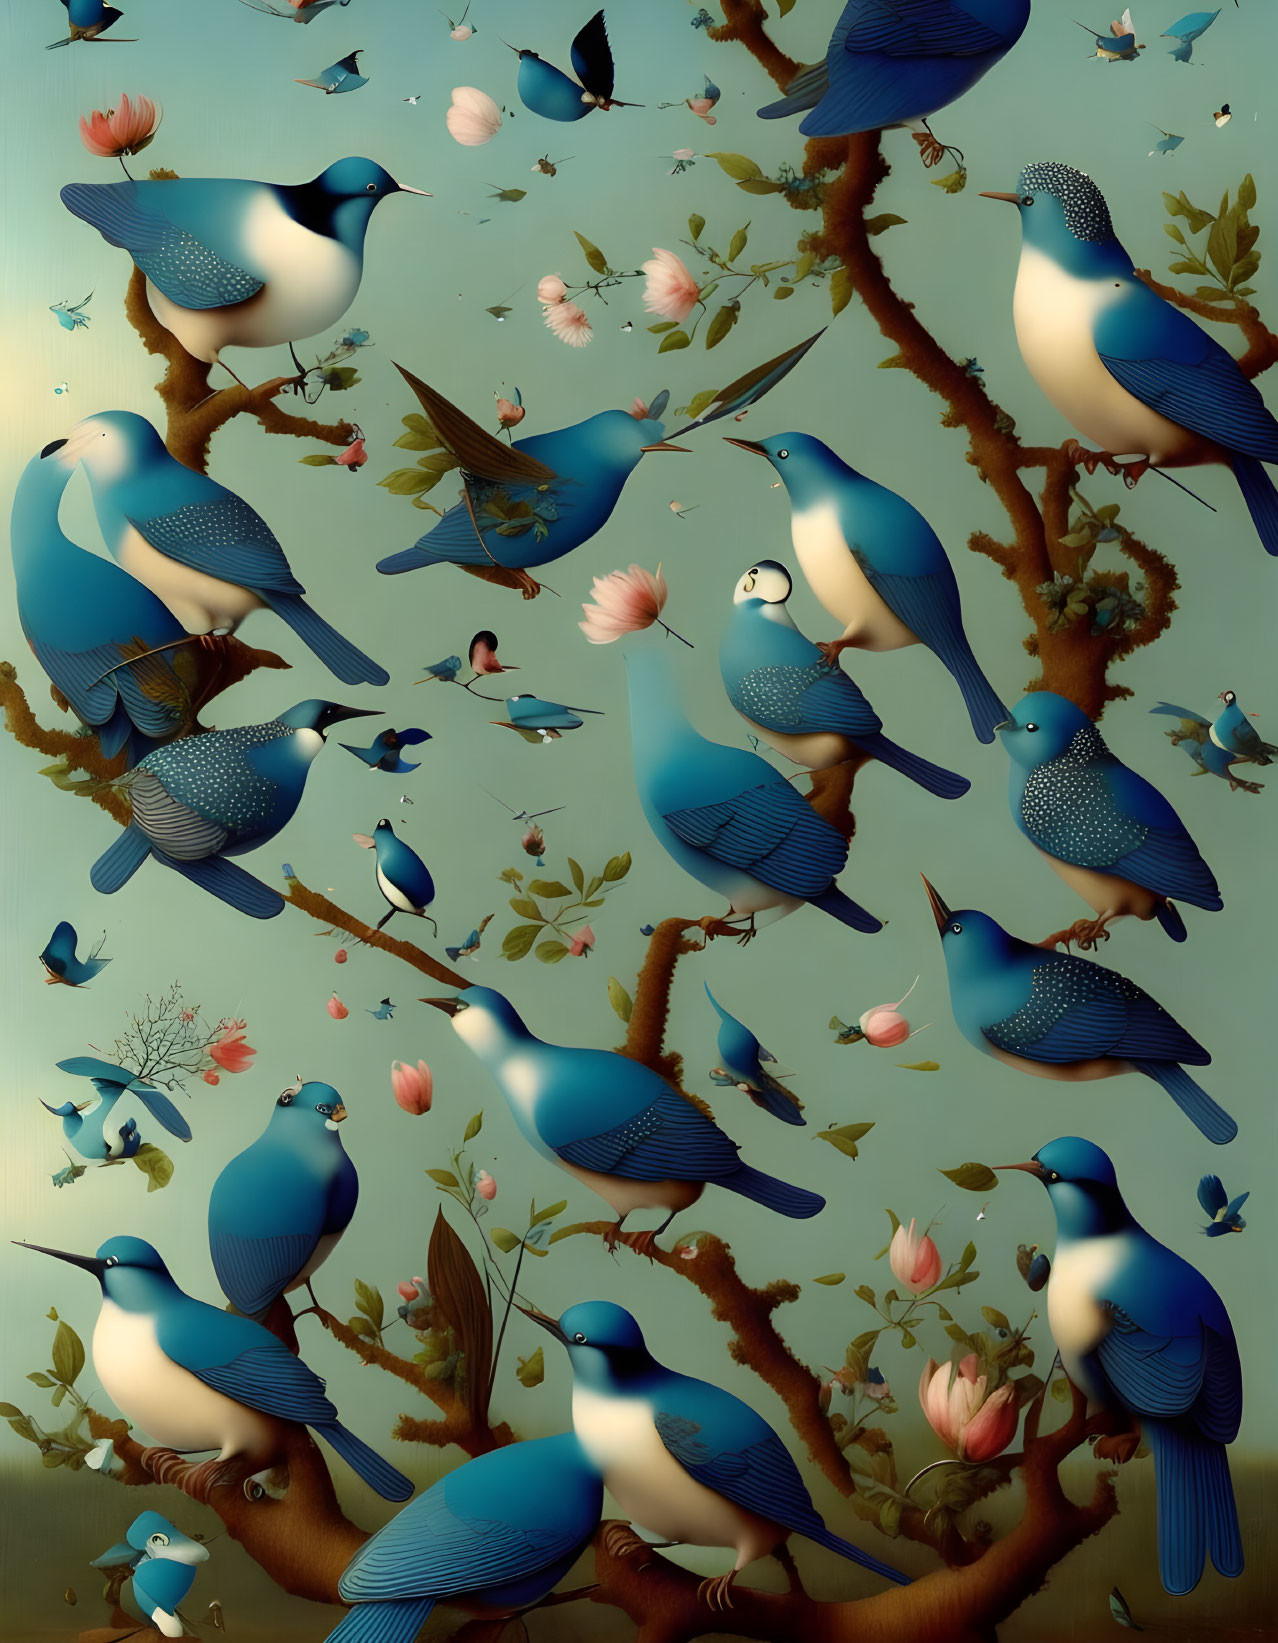 Stylized blue birds on flowering branches in artistic illustration